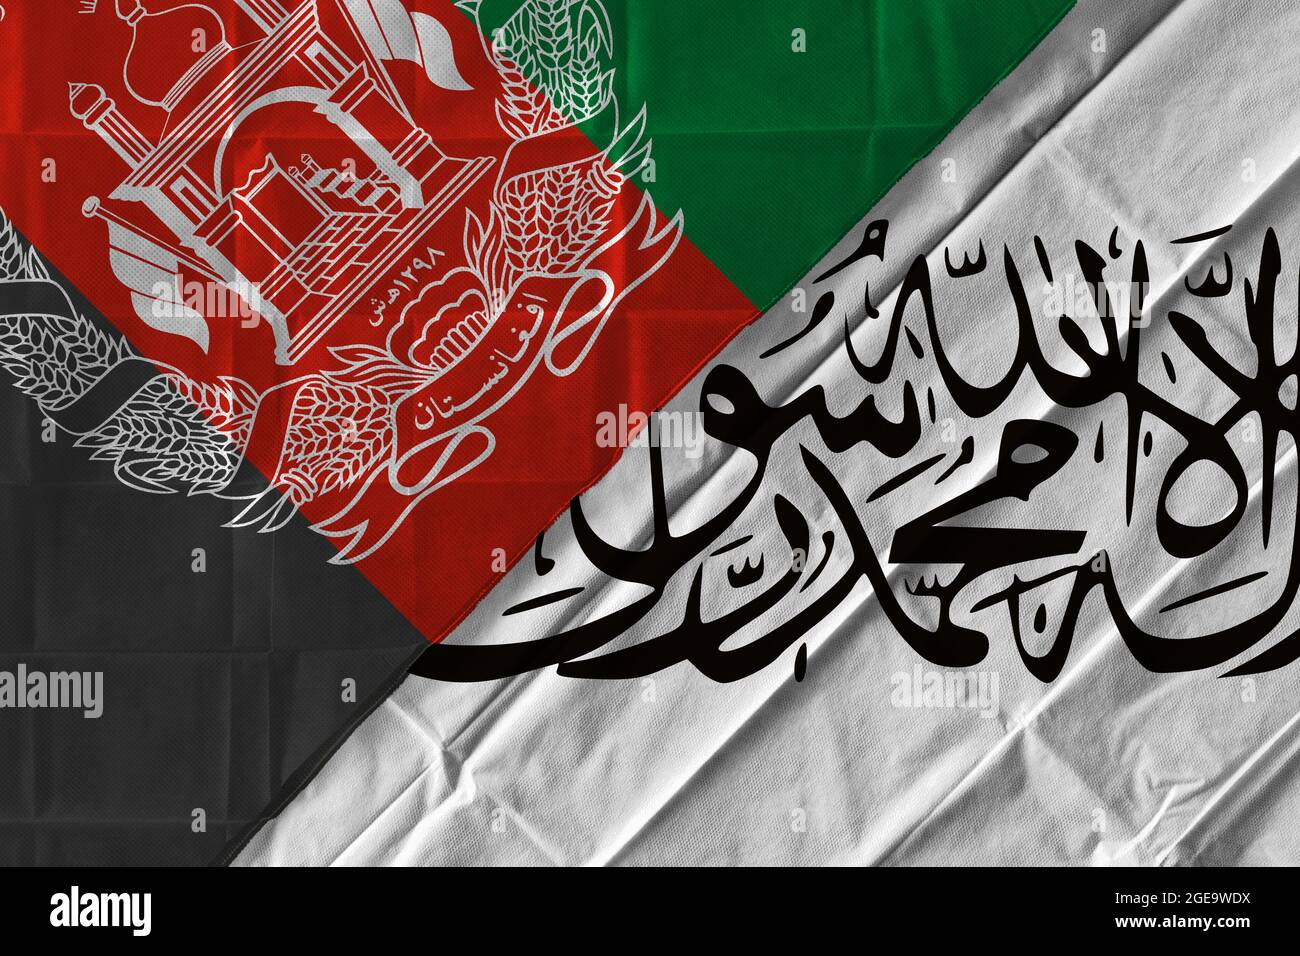 Concept of the situation in Afghanistan with flags of the Government and the Taliban over each other Stock Photo